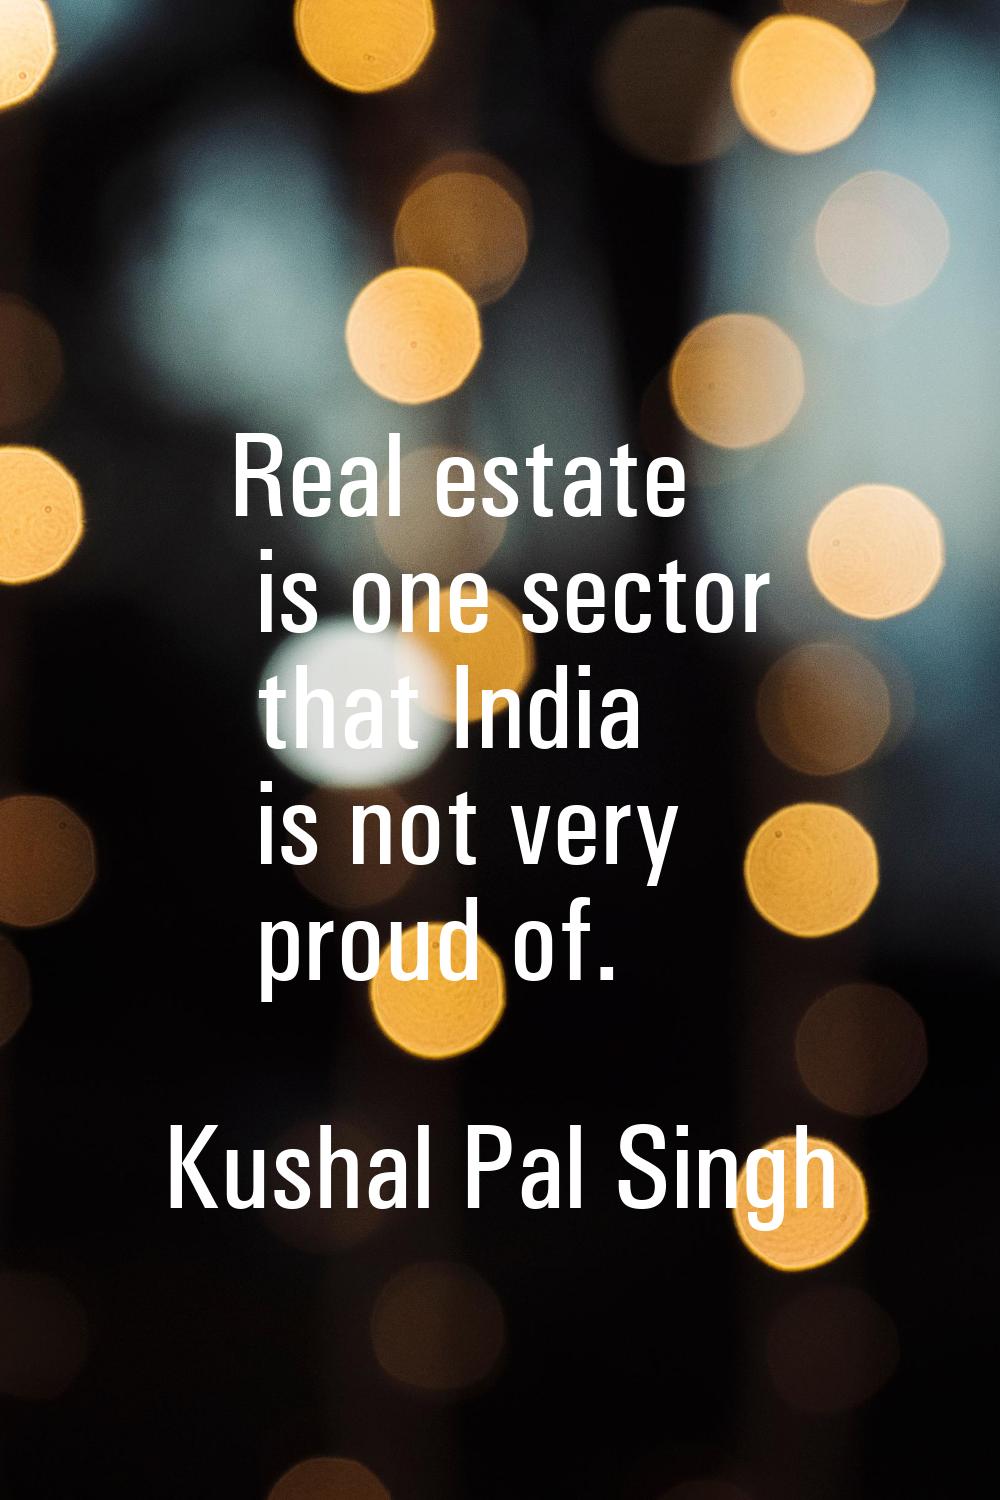 Real estate is one sector that India is not very proud of.